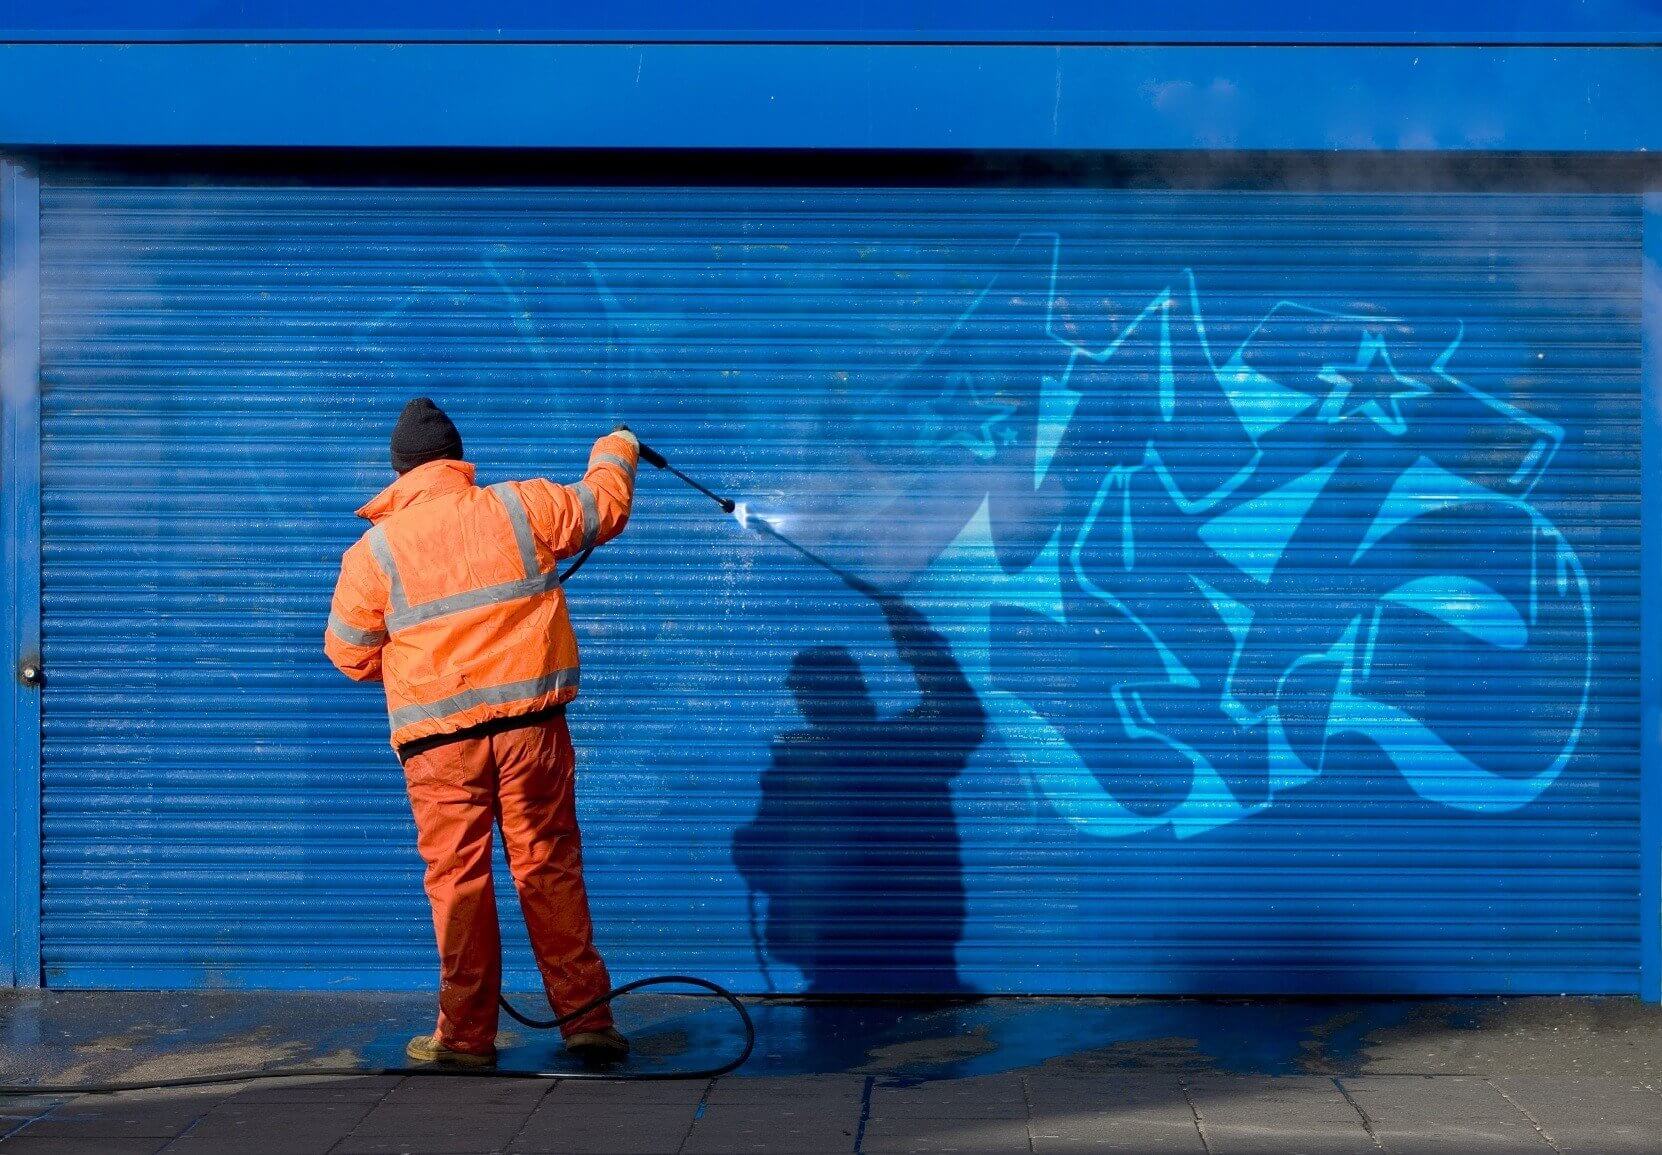 Graffiti removal and cleaning in progress by a skilled graffiti hygiene technician.